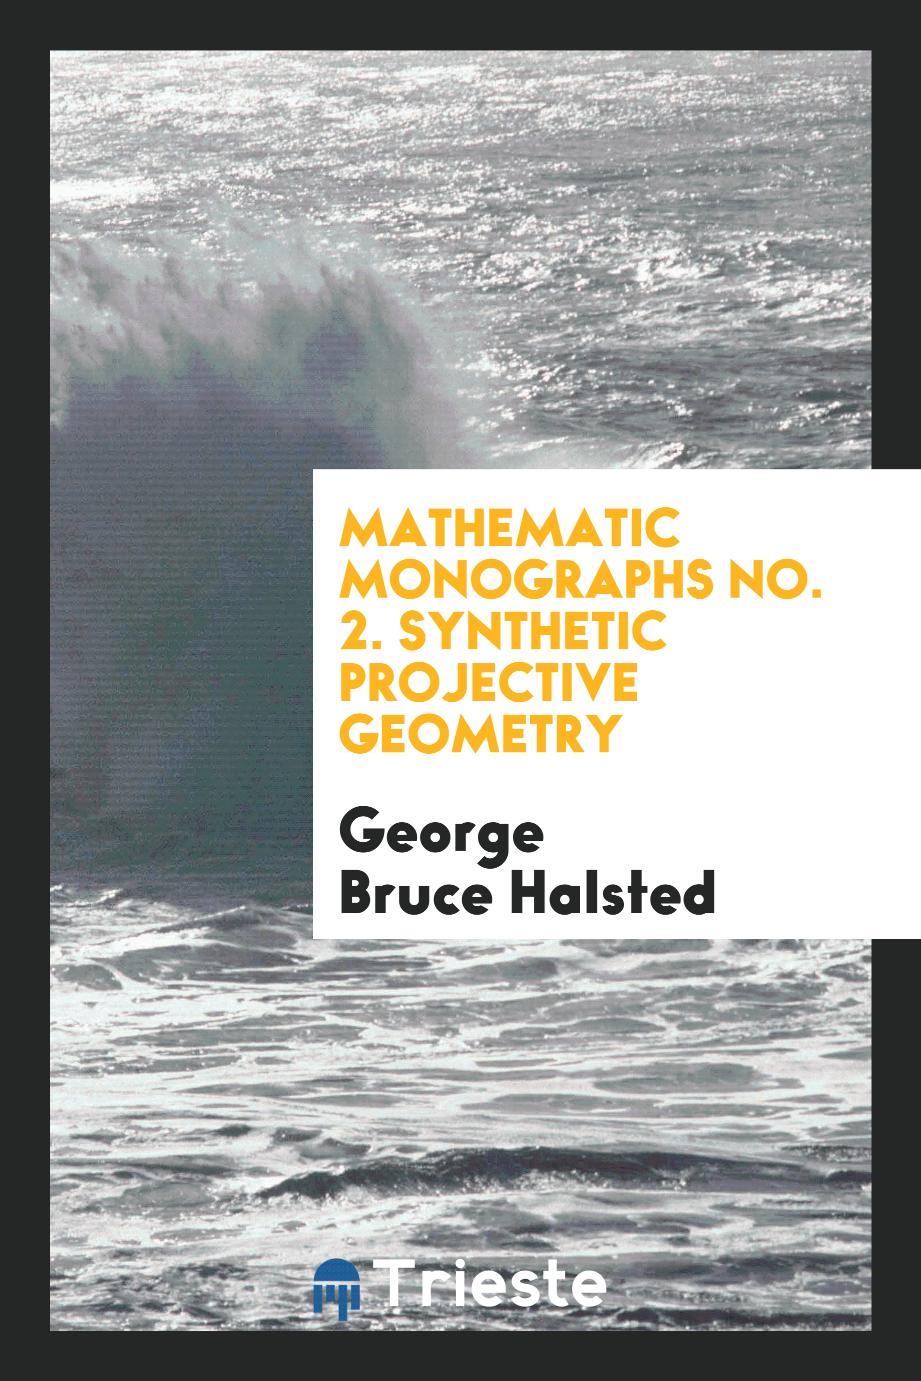 Mathematic Monographs No. 2. Synthetic Projective Geometry